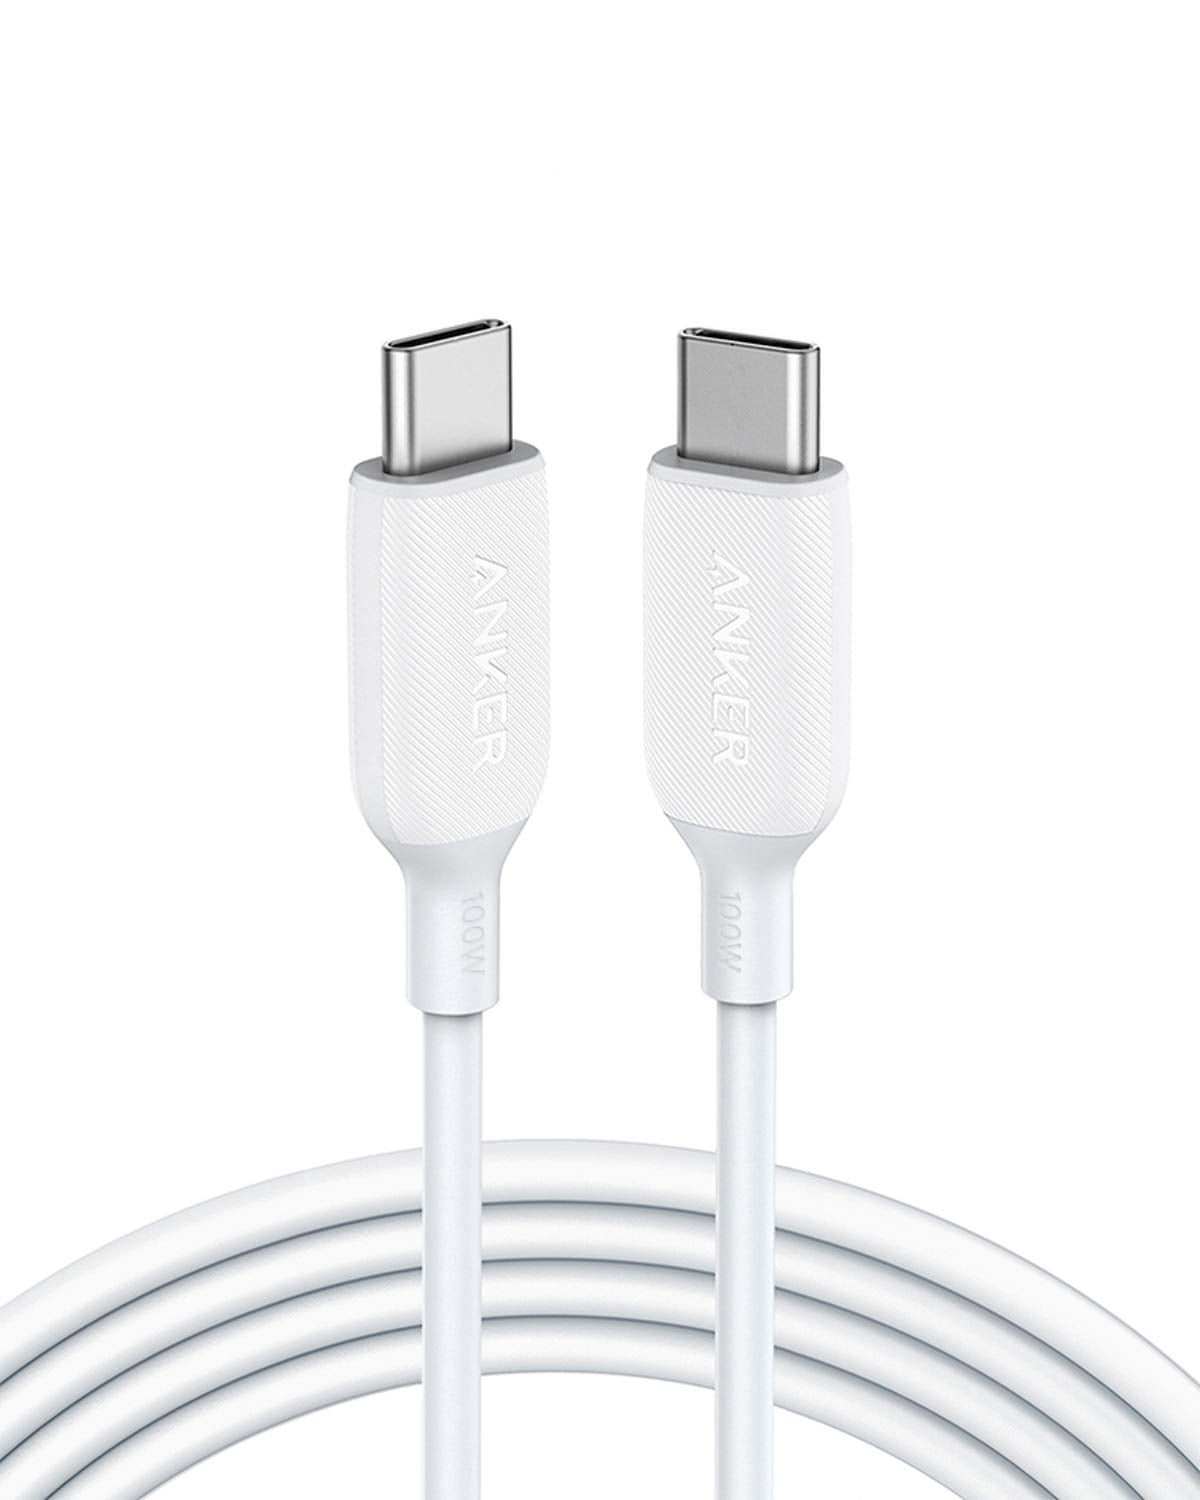 Anker Powerline III 100W USB C Charger Cable 6ft Type C Charging Data Sync  [White] 